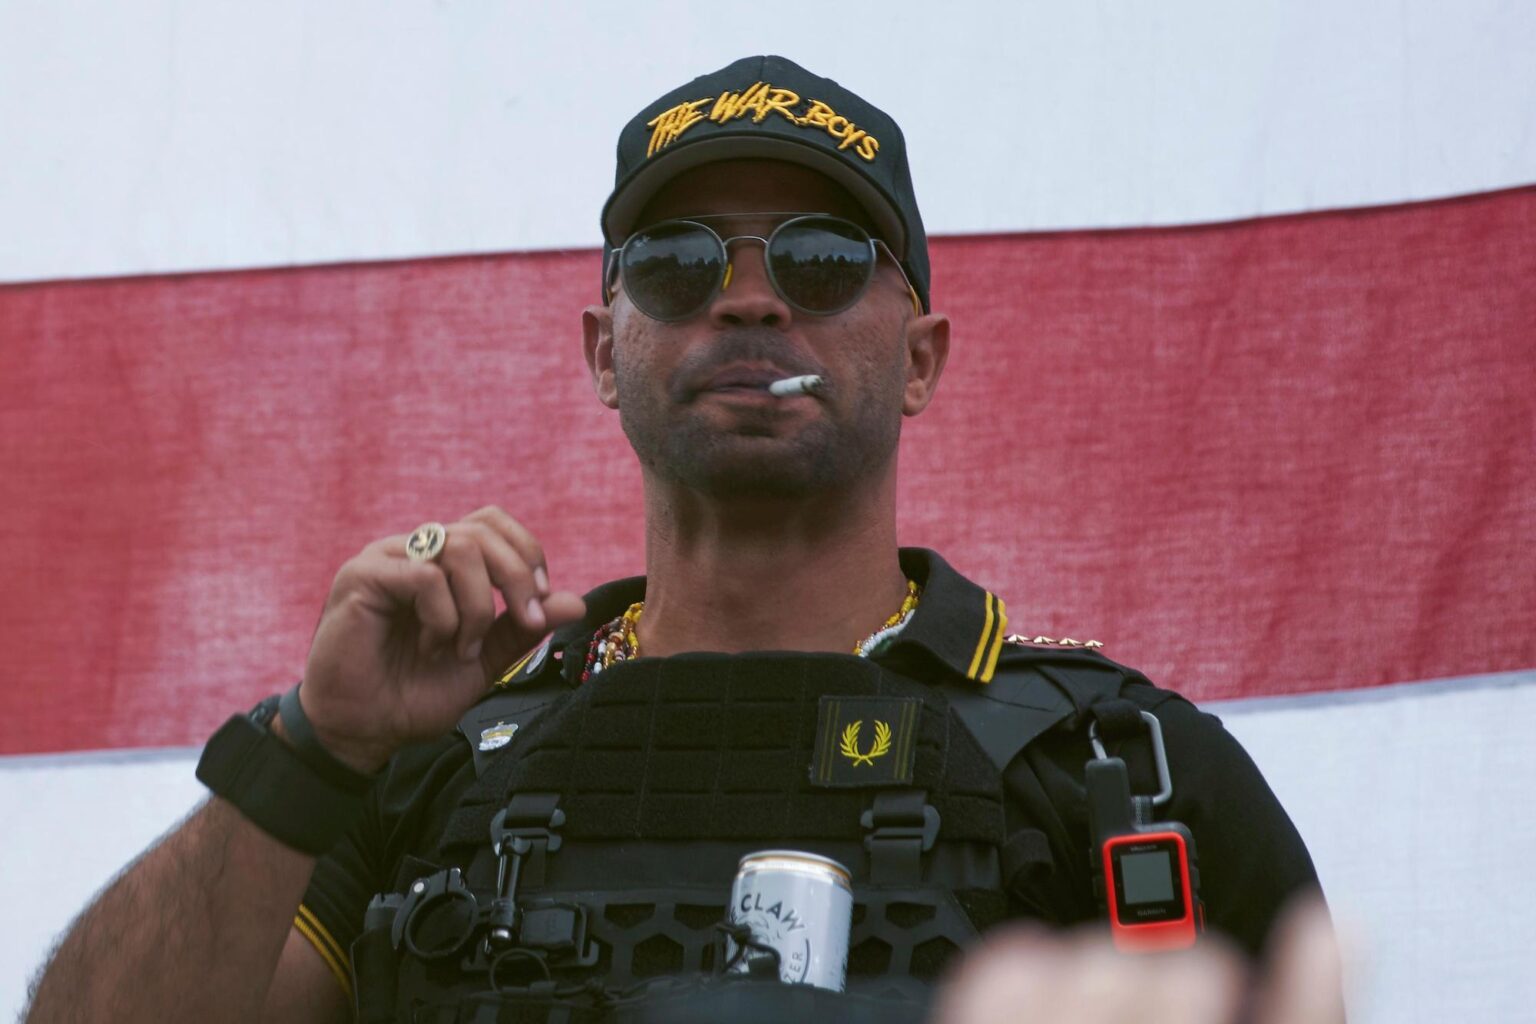 Did the FBI infiltrate the Proud Boys? See all the evidence pointing towards controversial leader Enrique Tarrio.